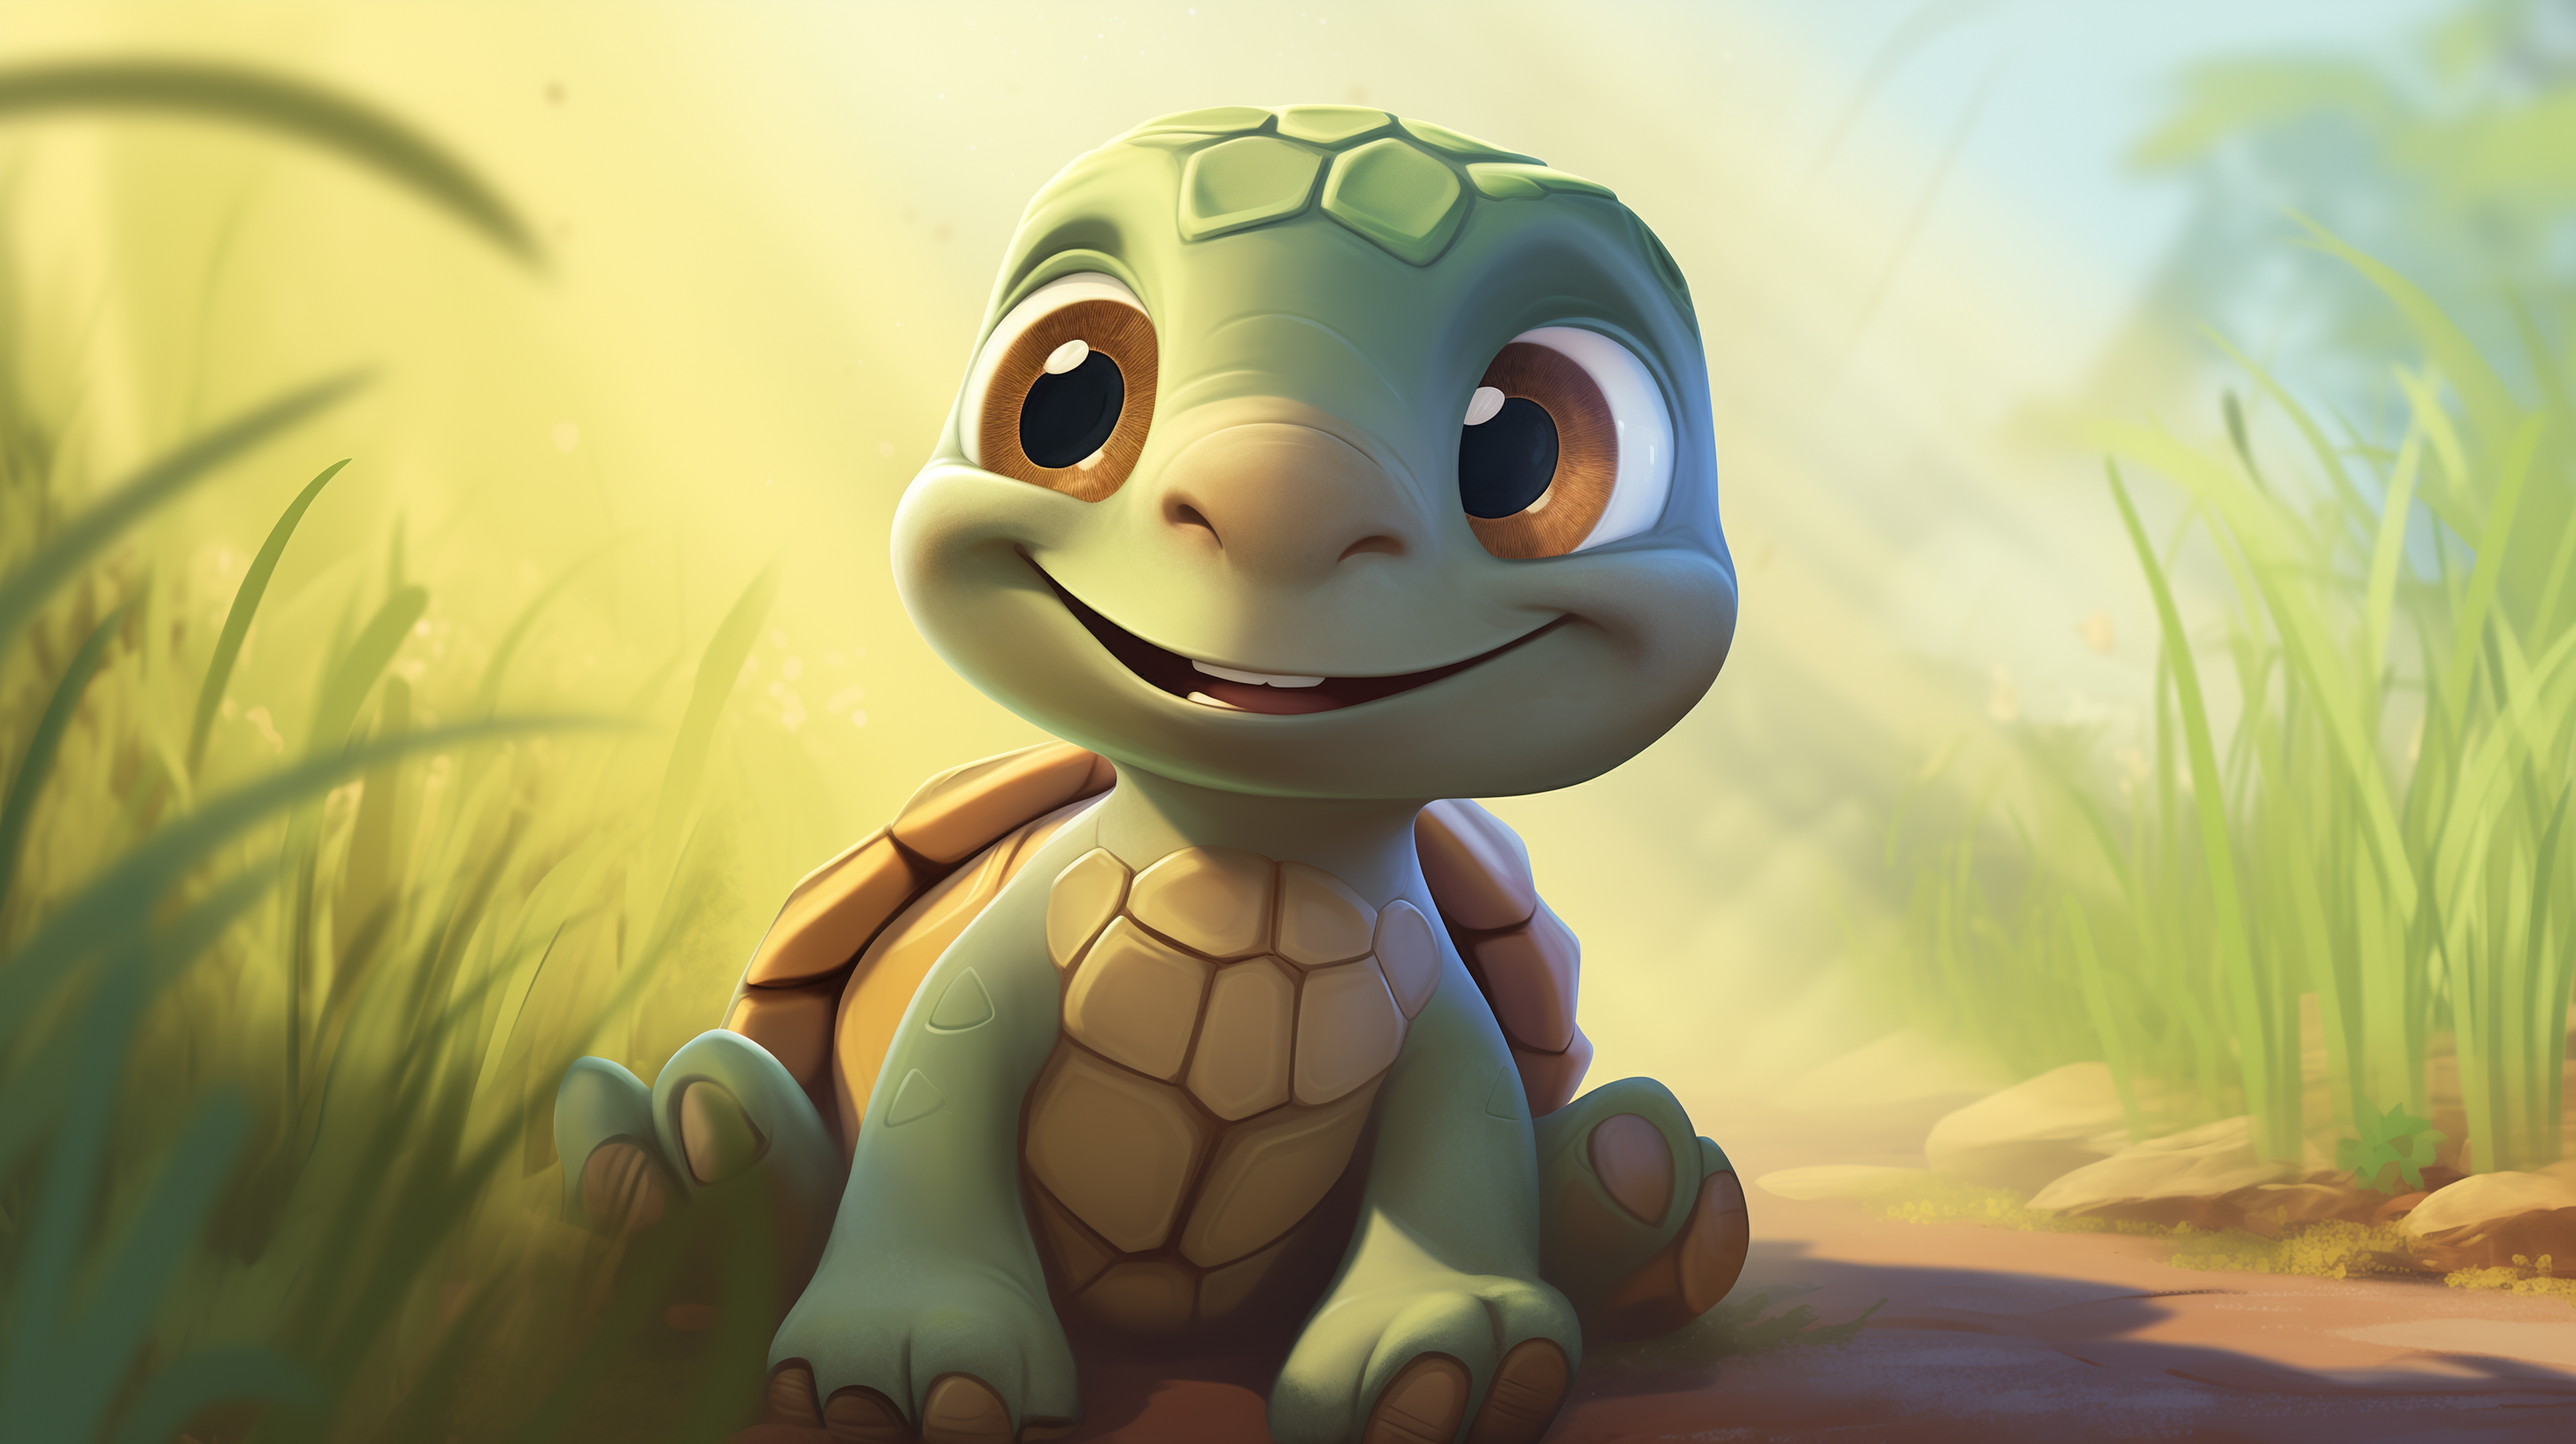 Cute animated turtle smiling in sunlit background for HD desktop wallpaper.